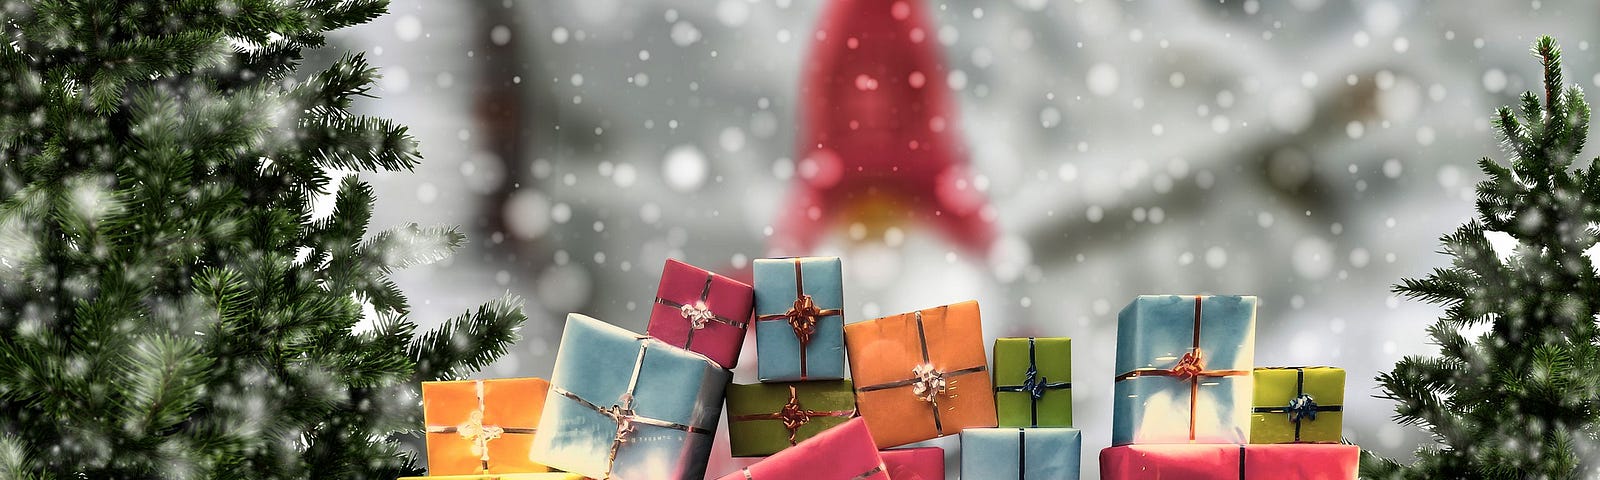 A pile of wrapped presents between two undecorated Christmas trees in a snowy scene with an elf standing behind the pile.